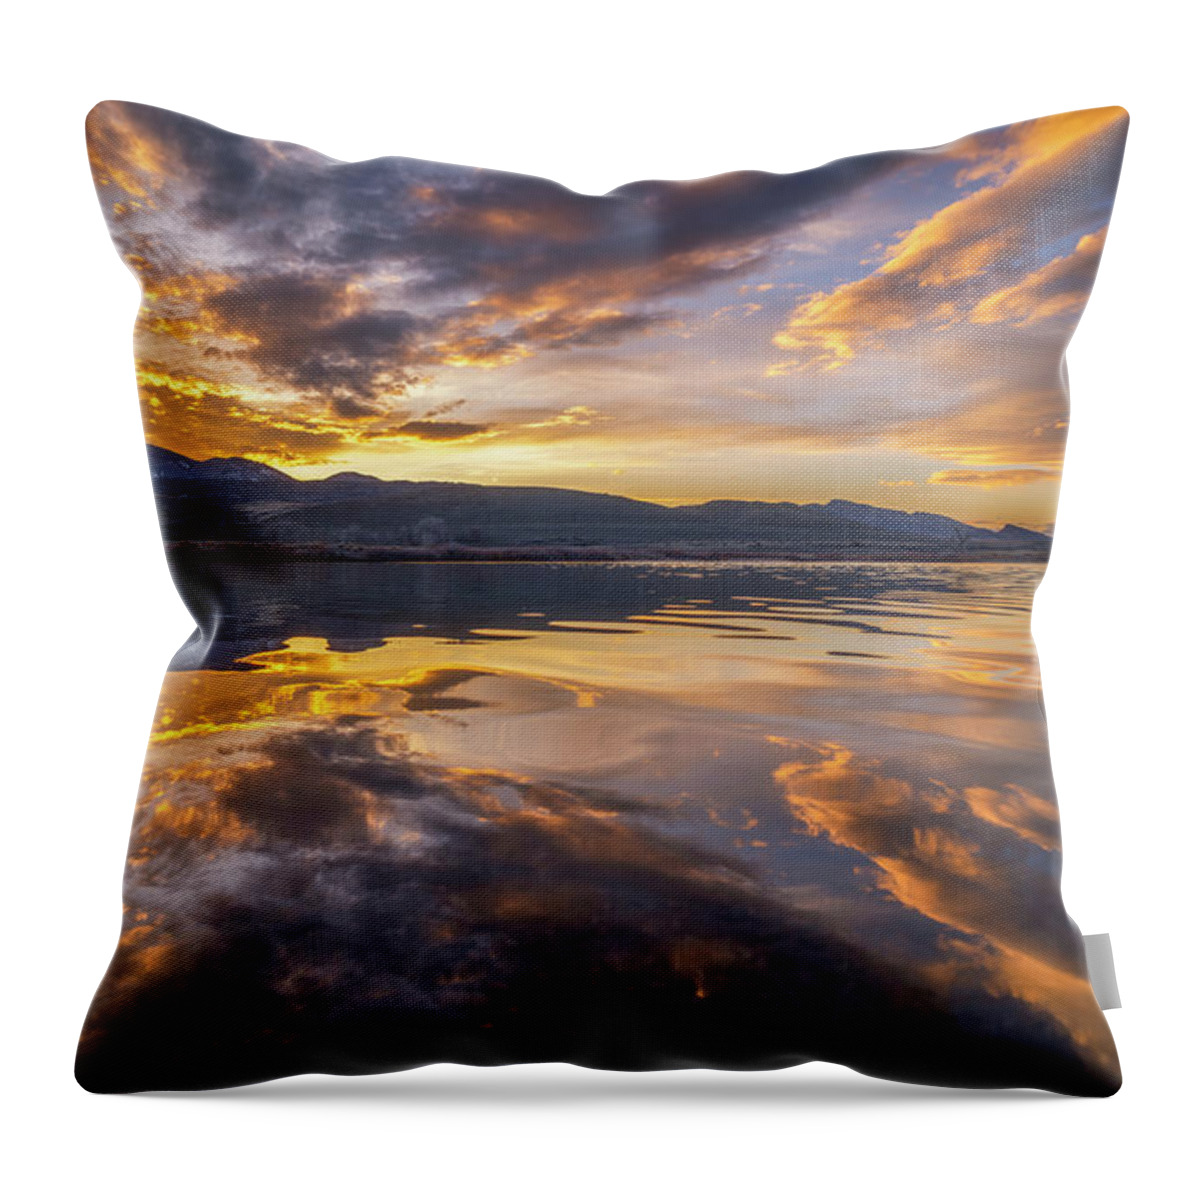 Sunset Throw Pillow featuring the photograph Chatfield Lake Sunset Reflection by Darren White